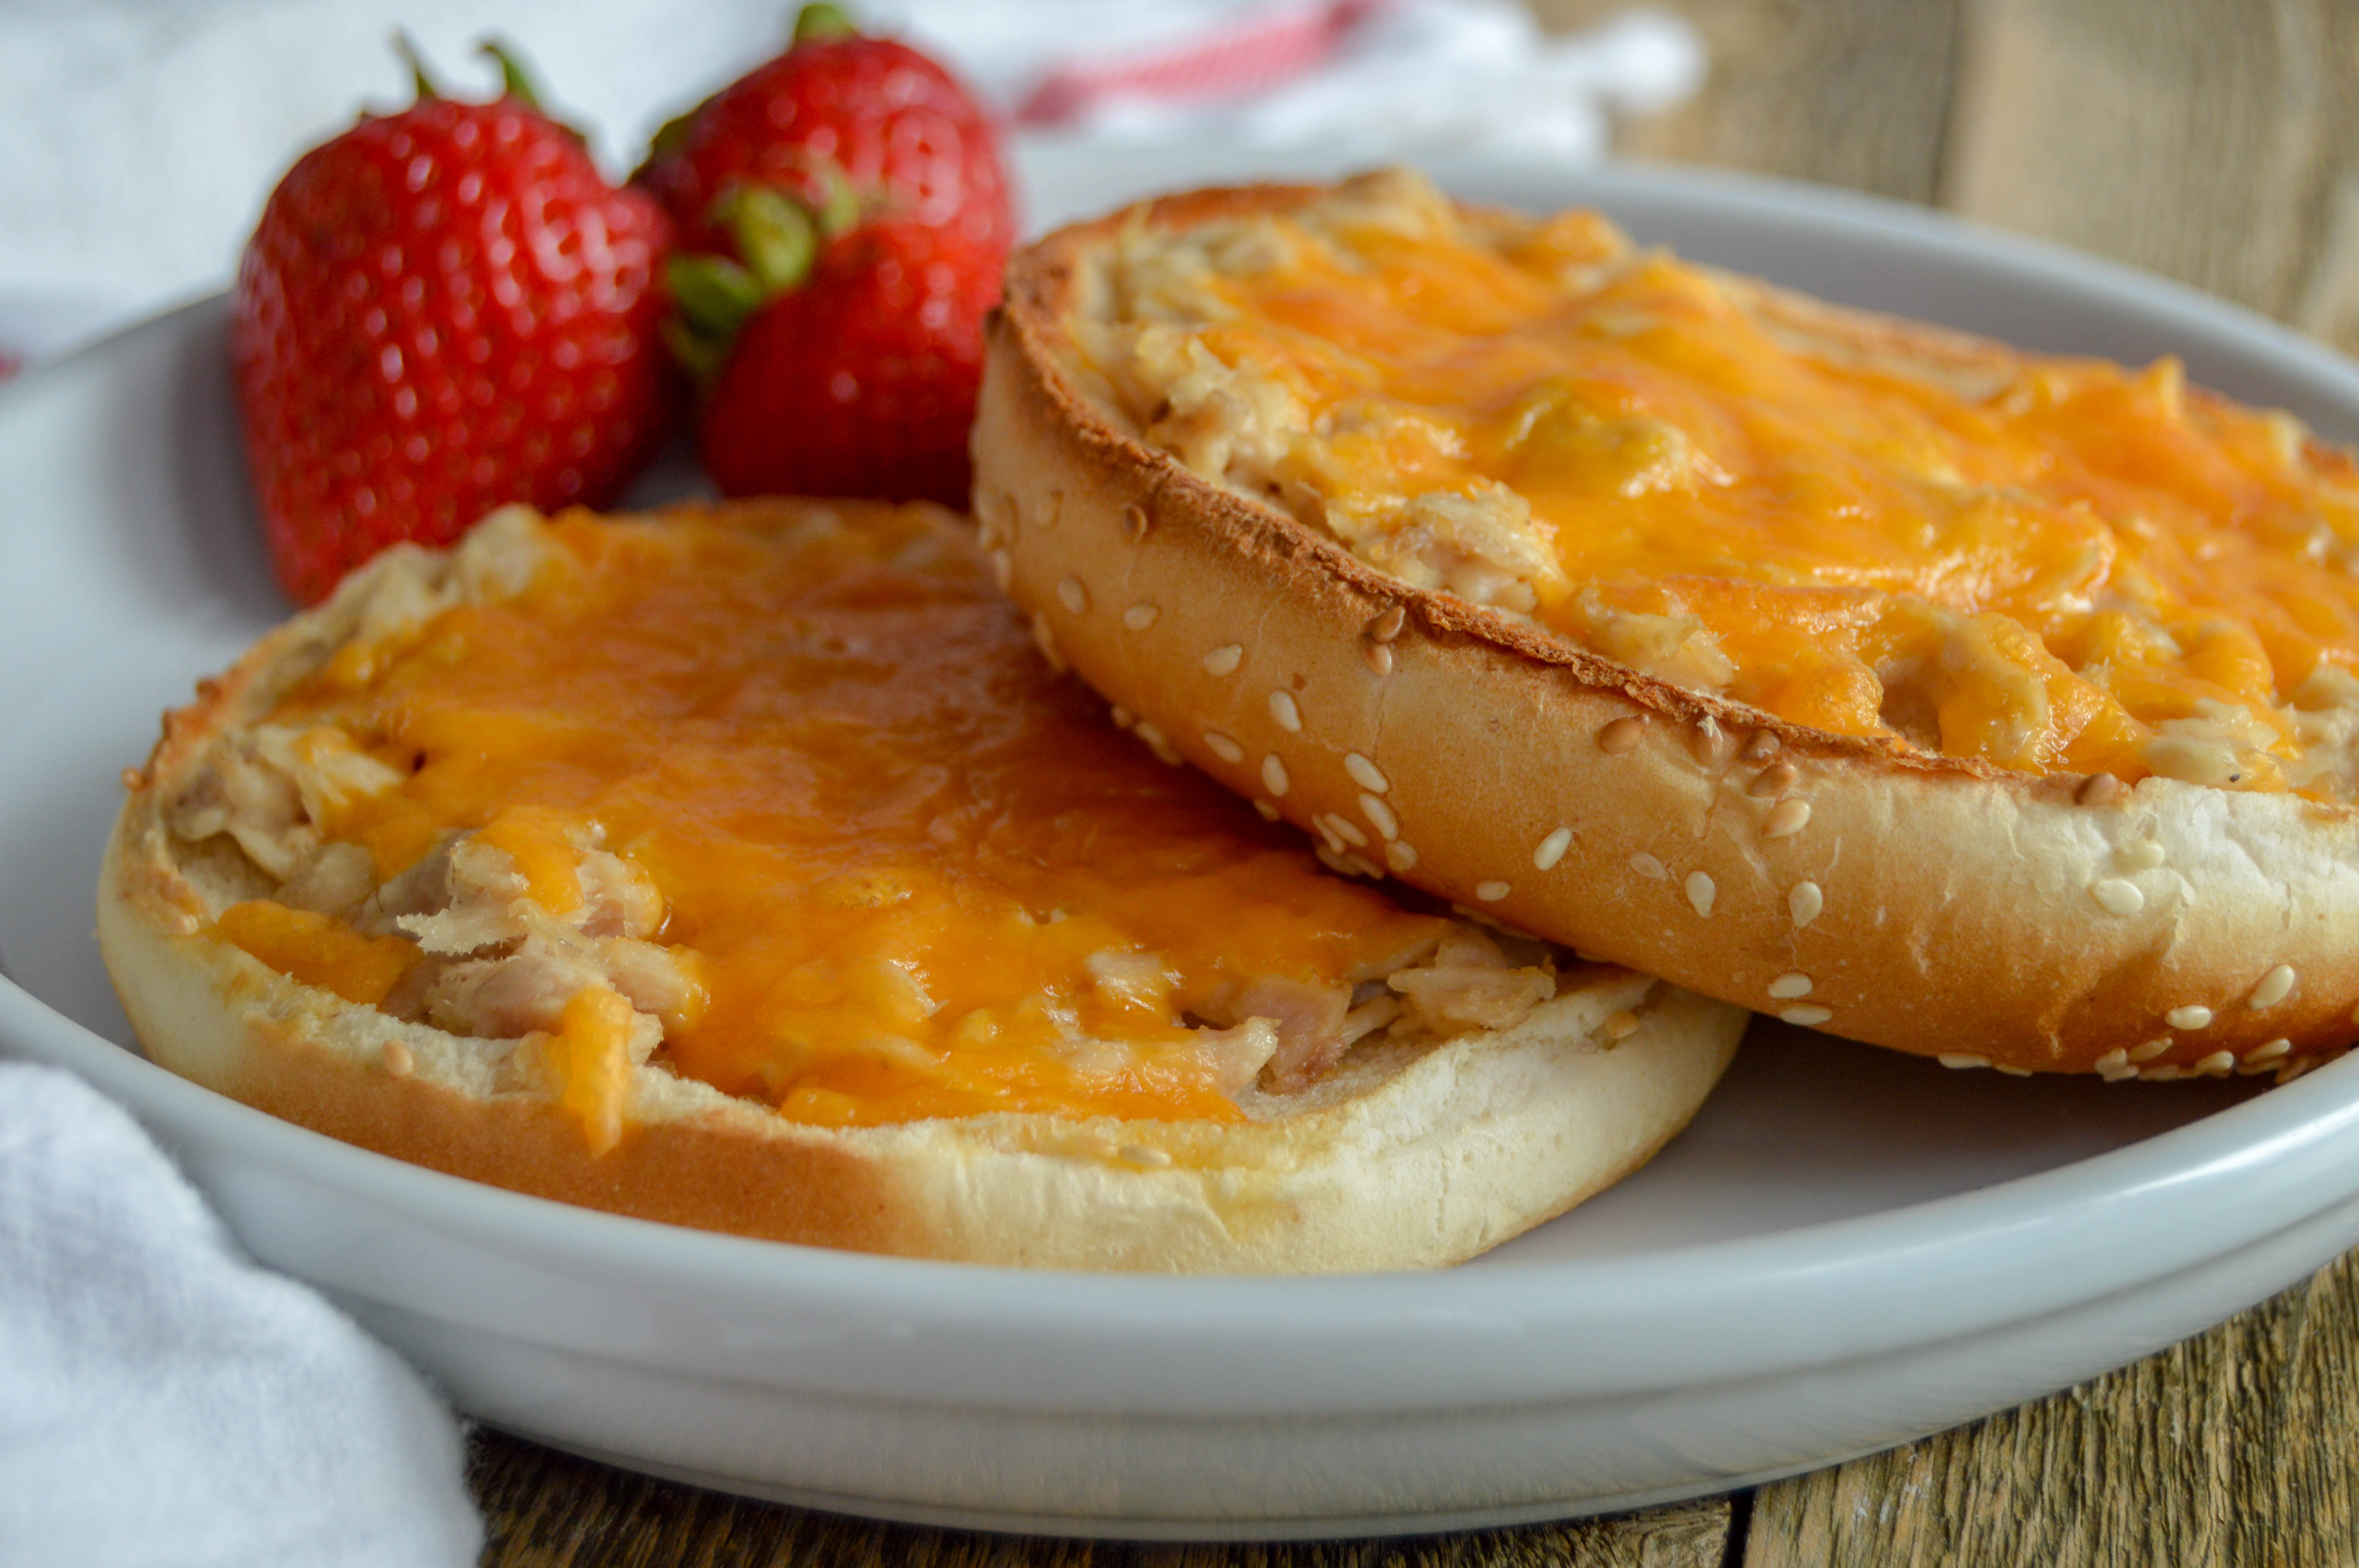 Bunwiches are an easy and quick dinner. Kids love them and they take about ten minutes to make. Tuna melt bunwiches oven recipe with hamburger buns, tuna, and cheddar cheese is a family favorite. Super easy dinner idea and kid approved! 